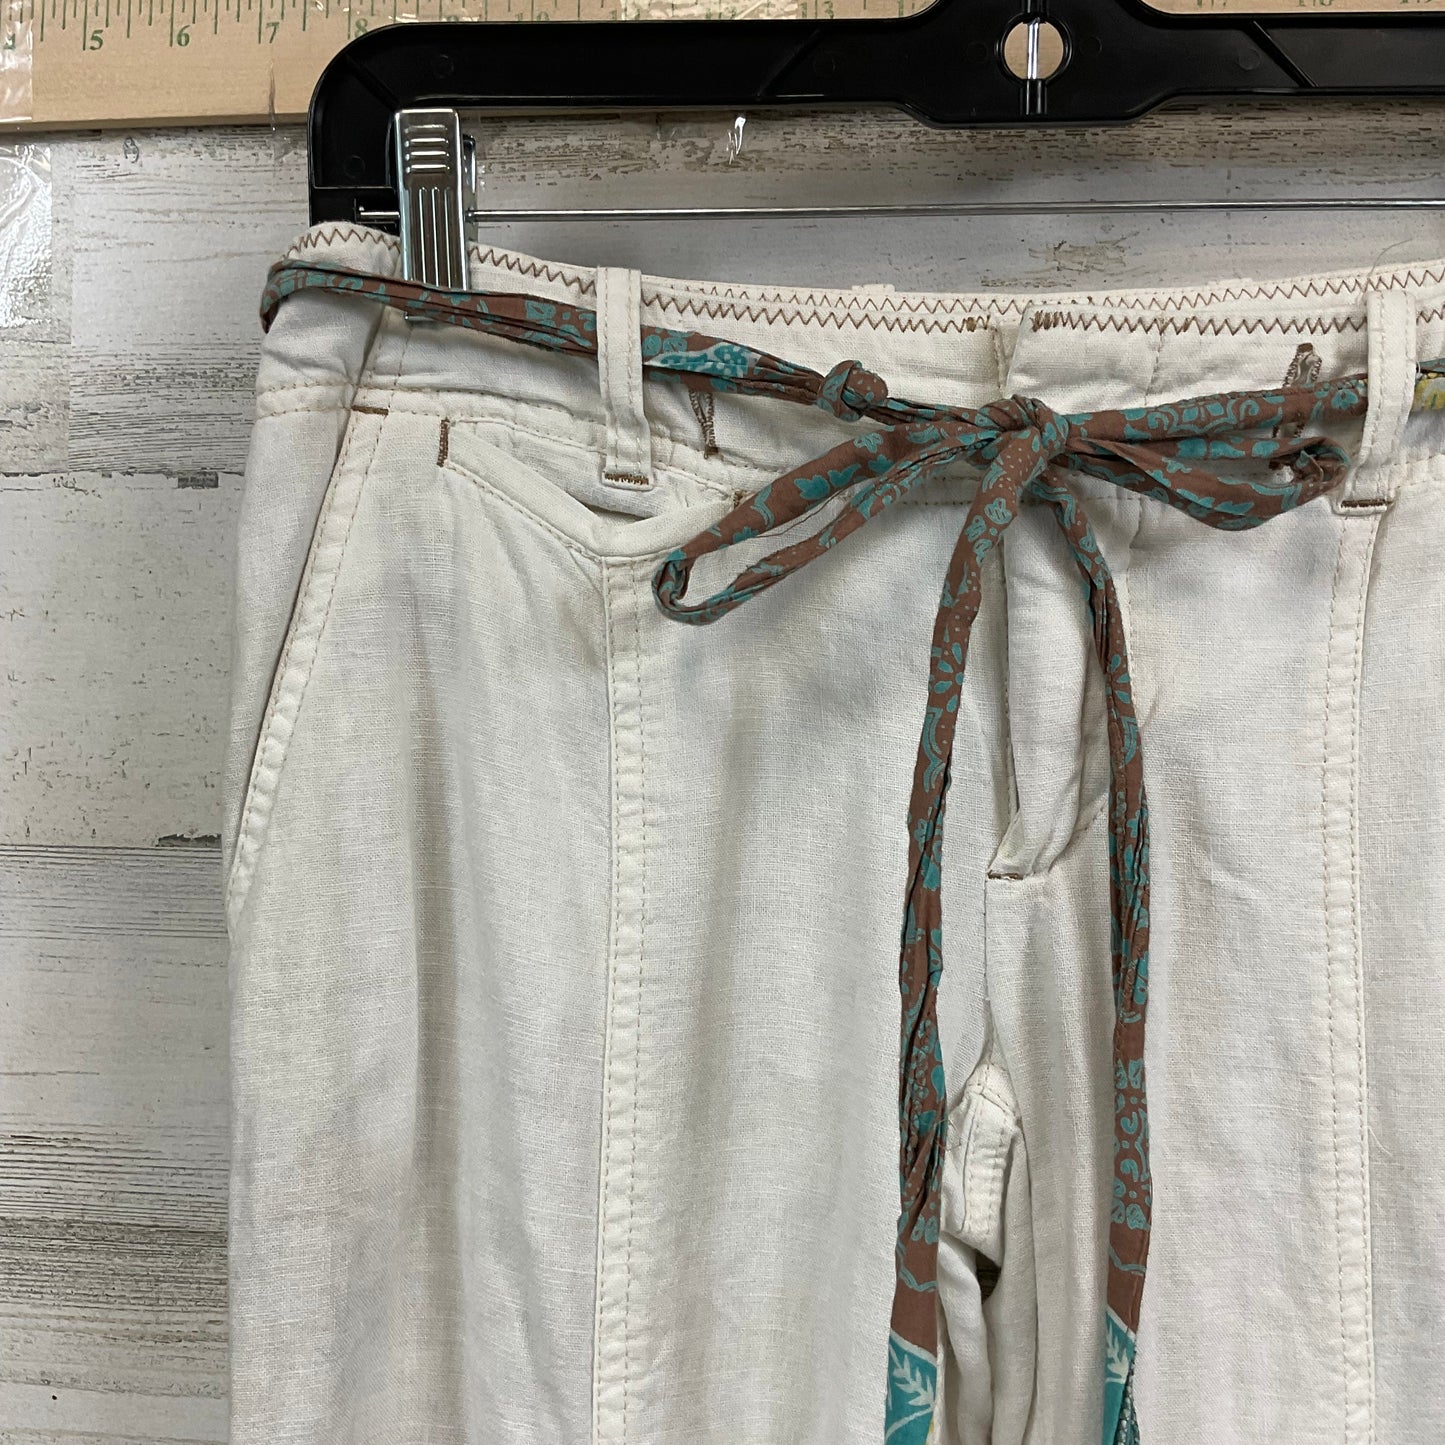 Cream Pants Other Free People, Size 0